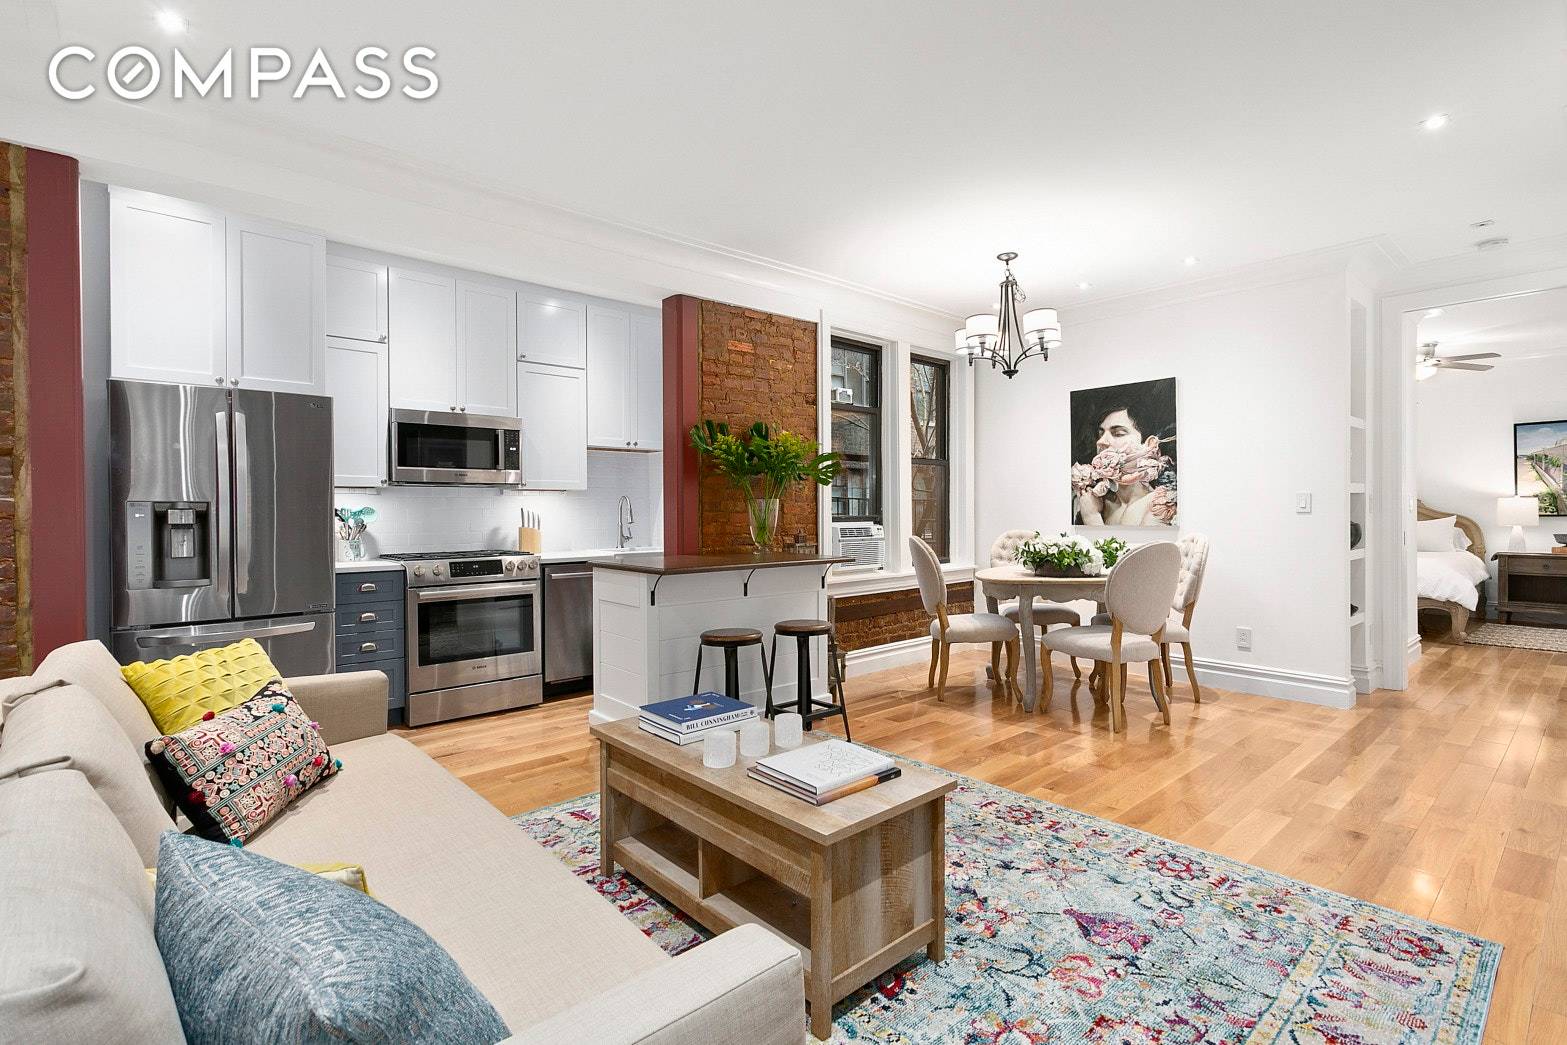 No detail was overlooked during the complete renovation of this gorgeous two bed, two bath home in prime Chelsea.